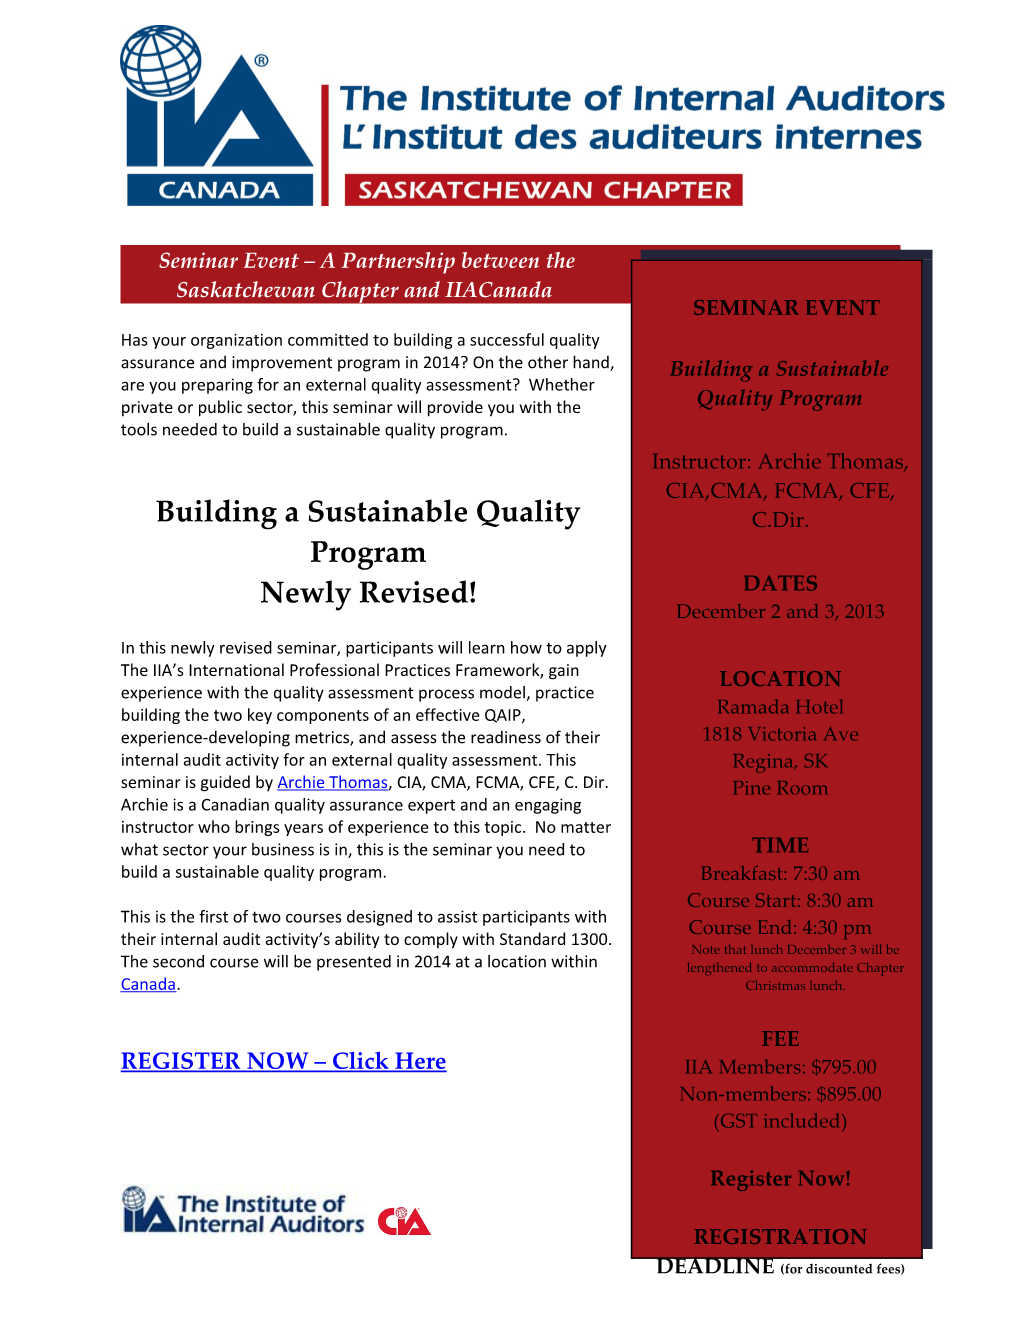 Building a Sustainable Quality Program